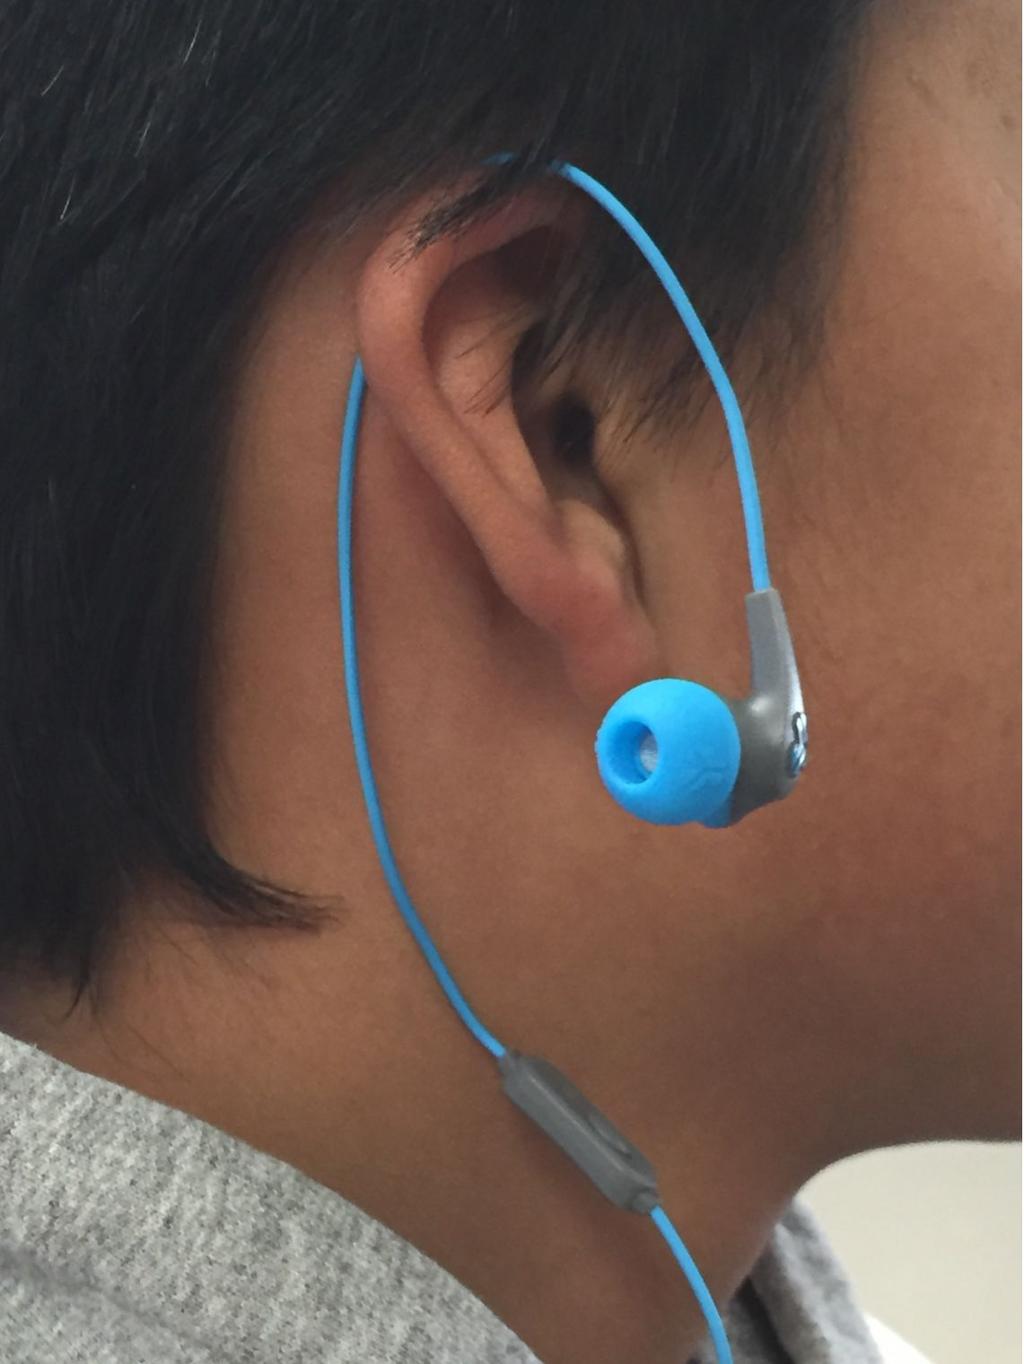 Headphones Headphones are only allowed on your ears when